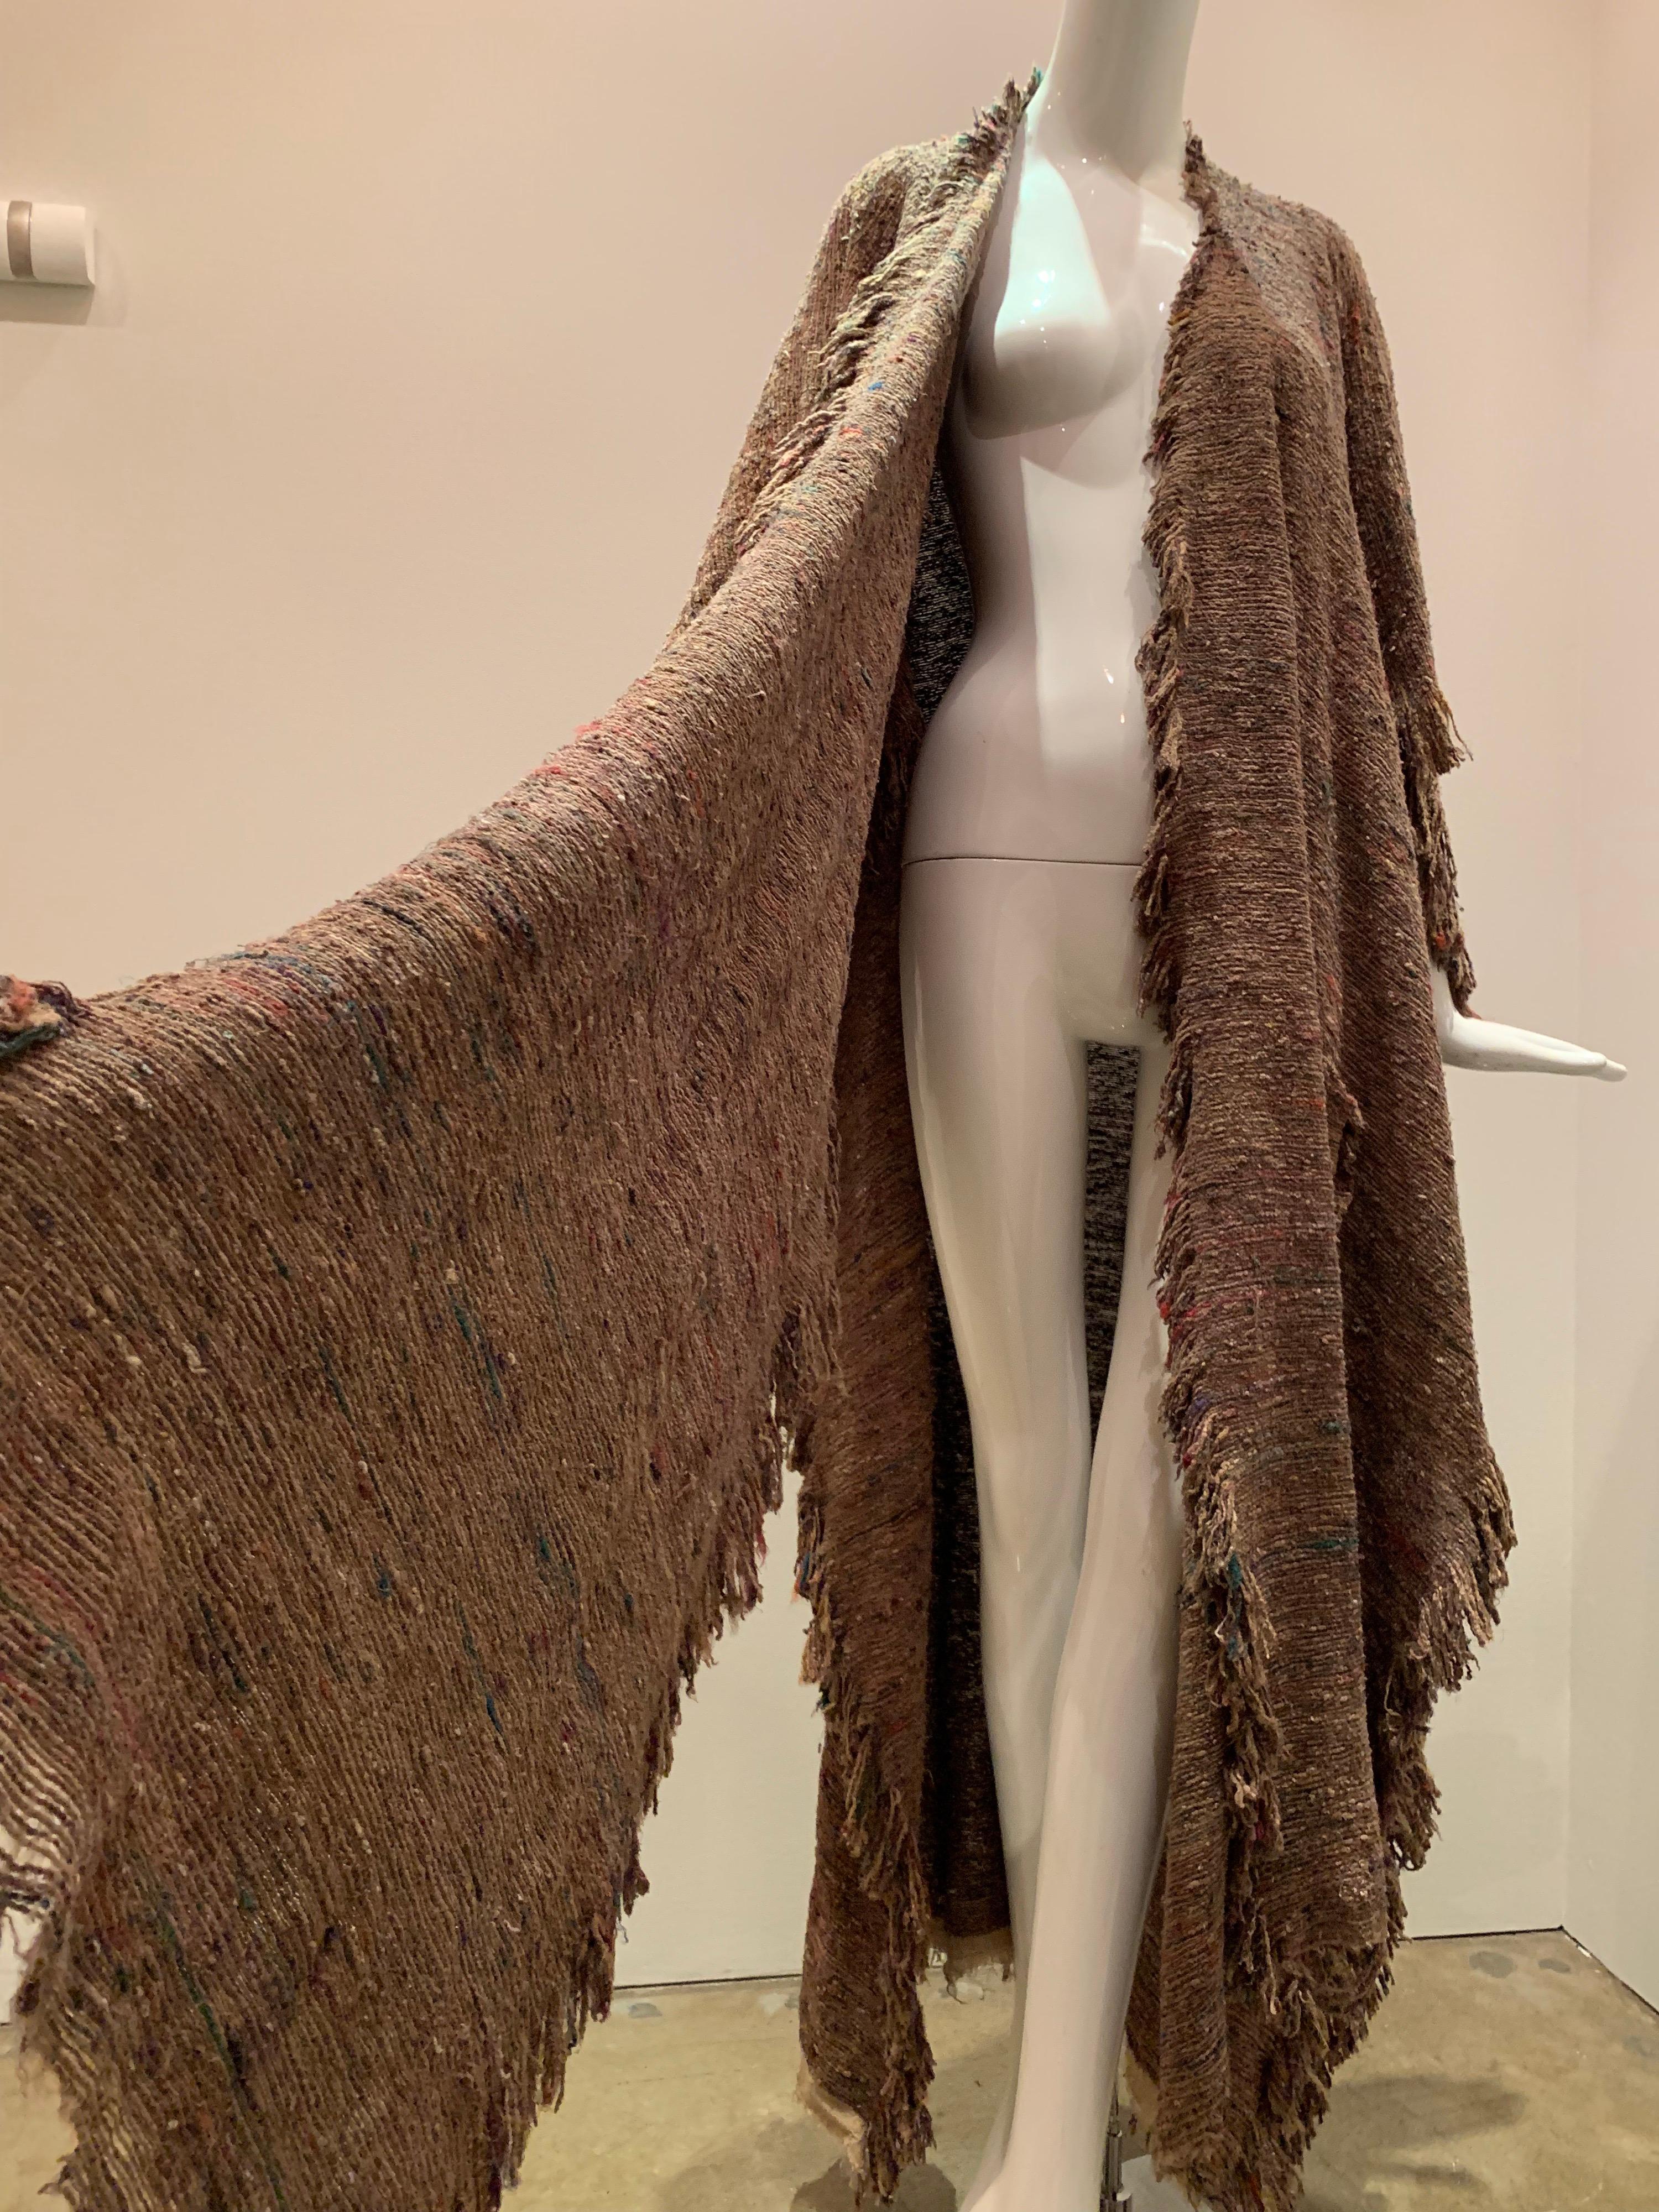 A Cappuccino Woven Silk Slubbed Shawl or Wrap W/ Fringe & Colors Shot Through In Excellent Condition For Sale In Gresham, OR